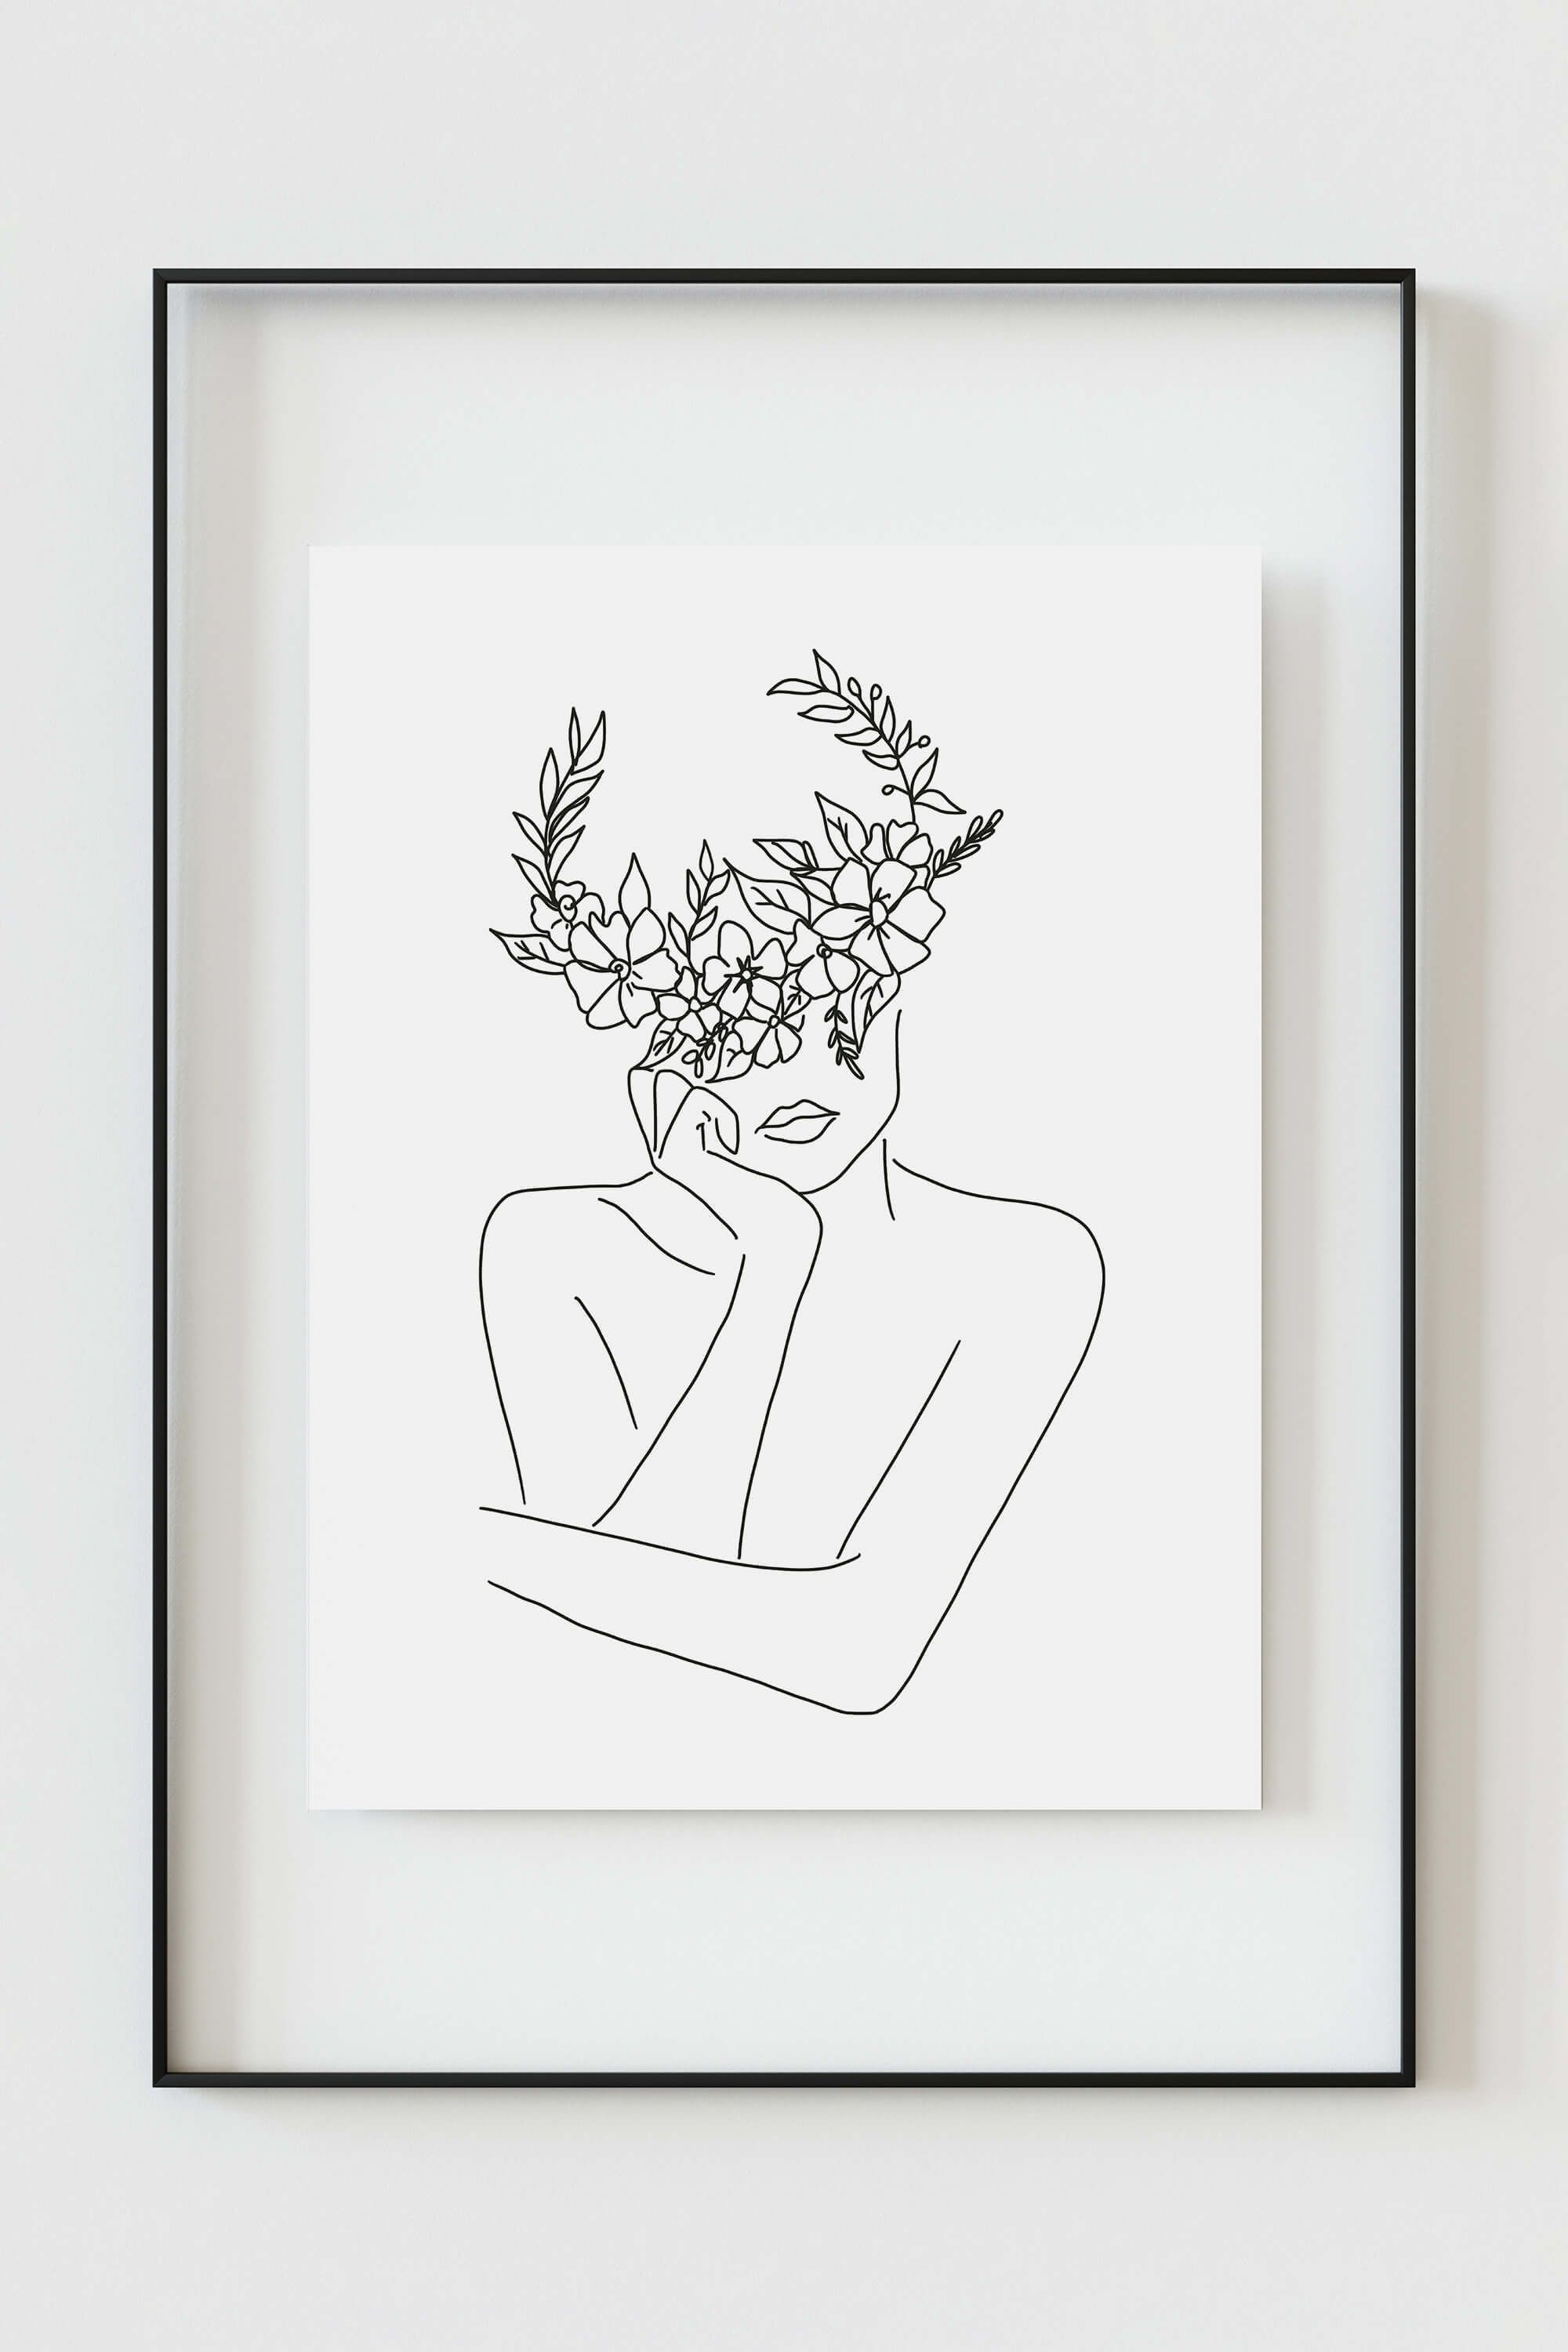 Close-up of an art print with an intricate floral crown, revealing delicate details in black and white. A sophisticated and timeless piece for your home decor.